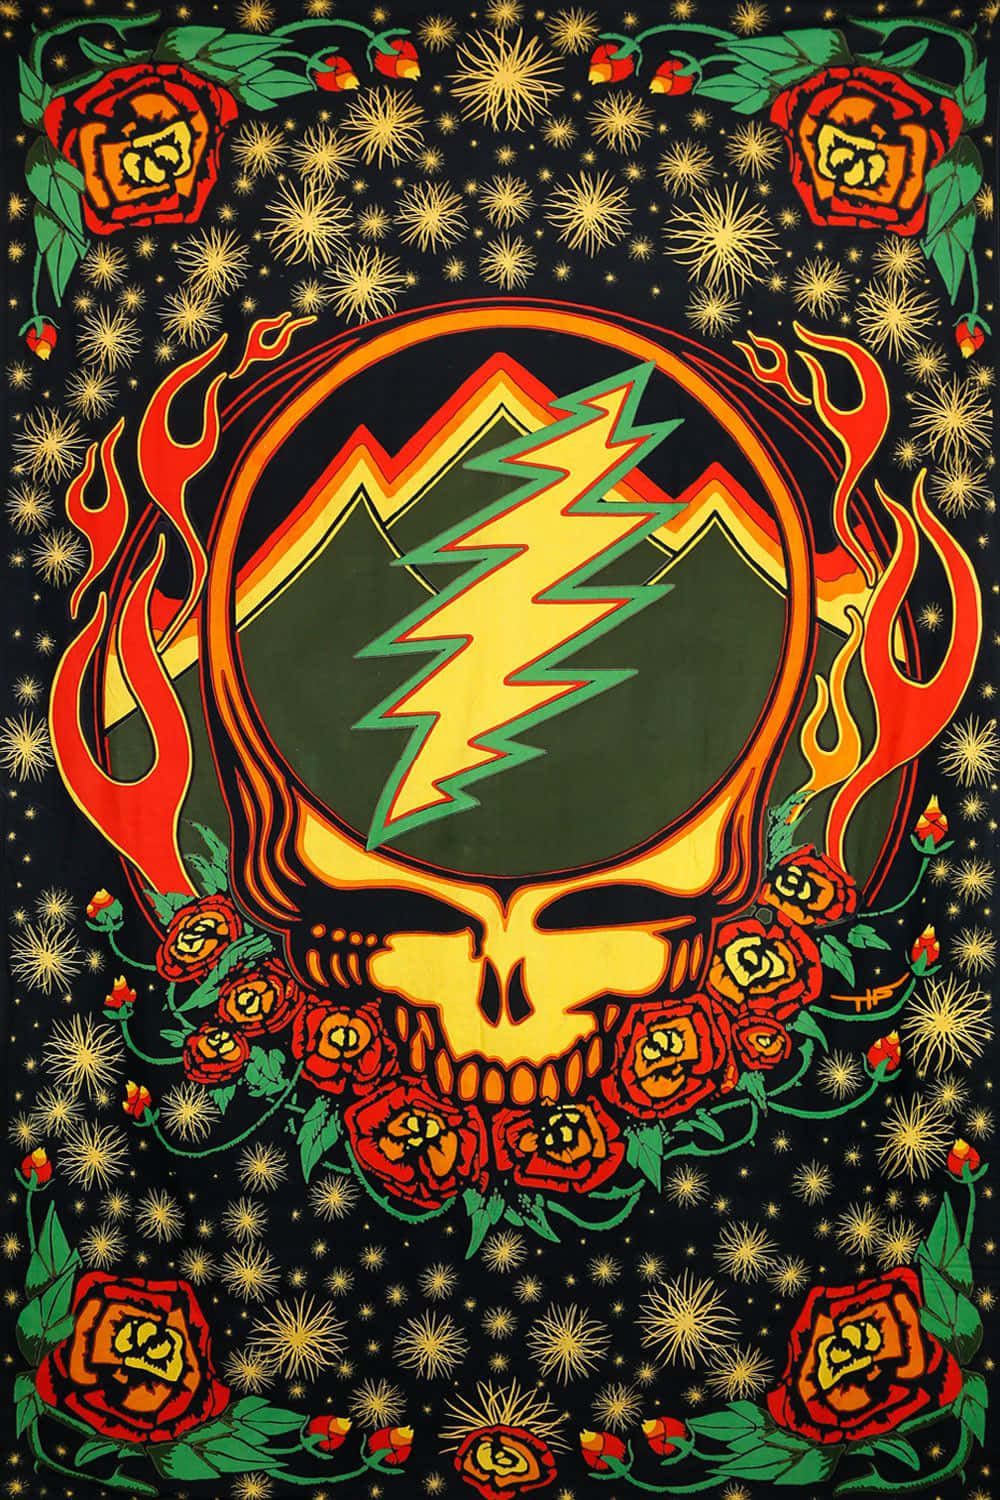 Download Text And Skull Logo Of Grateful Dead Iphone Wallpaper